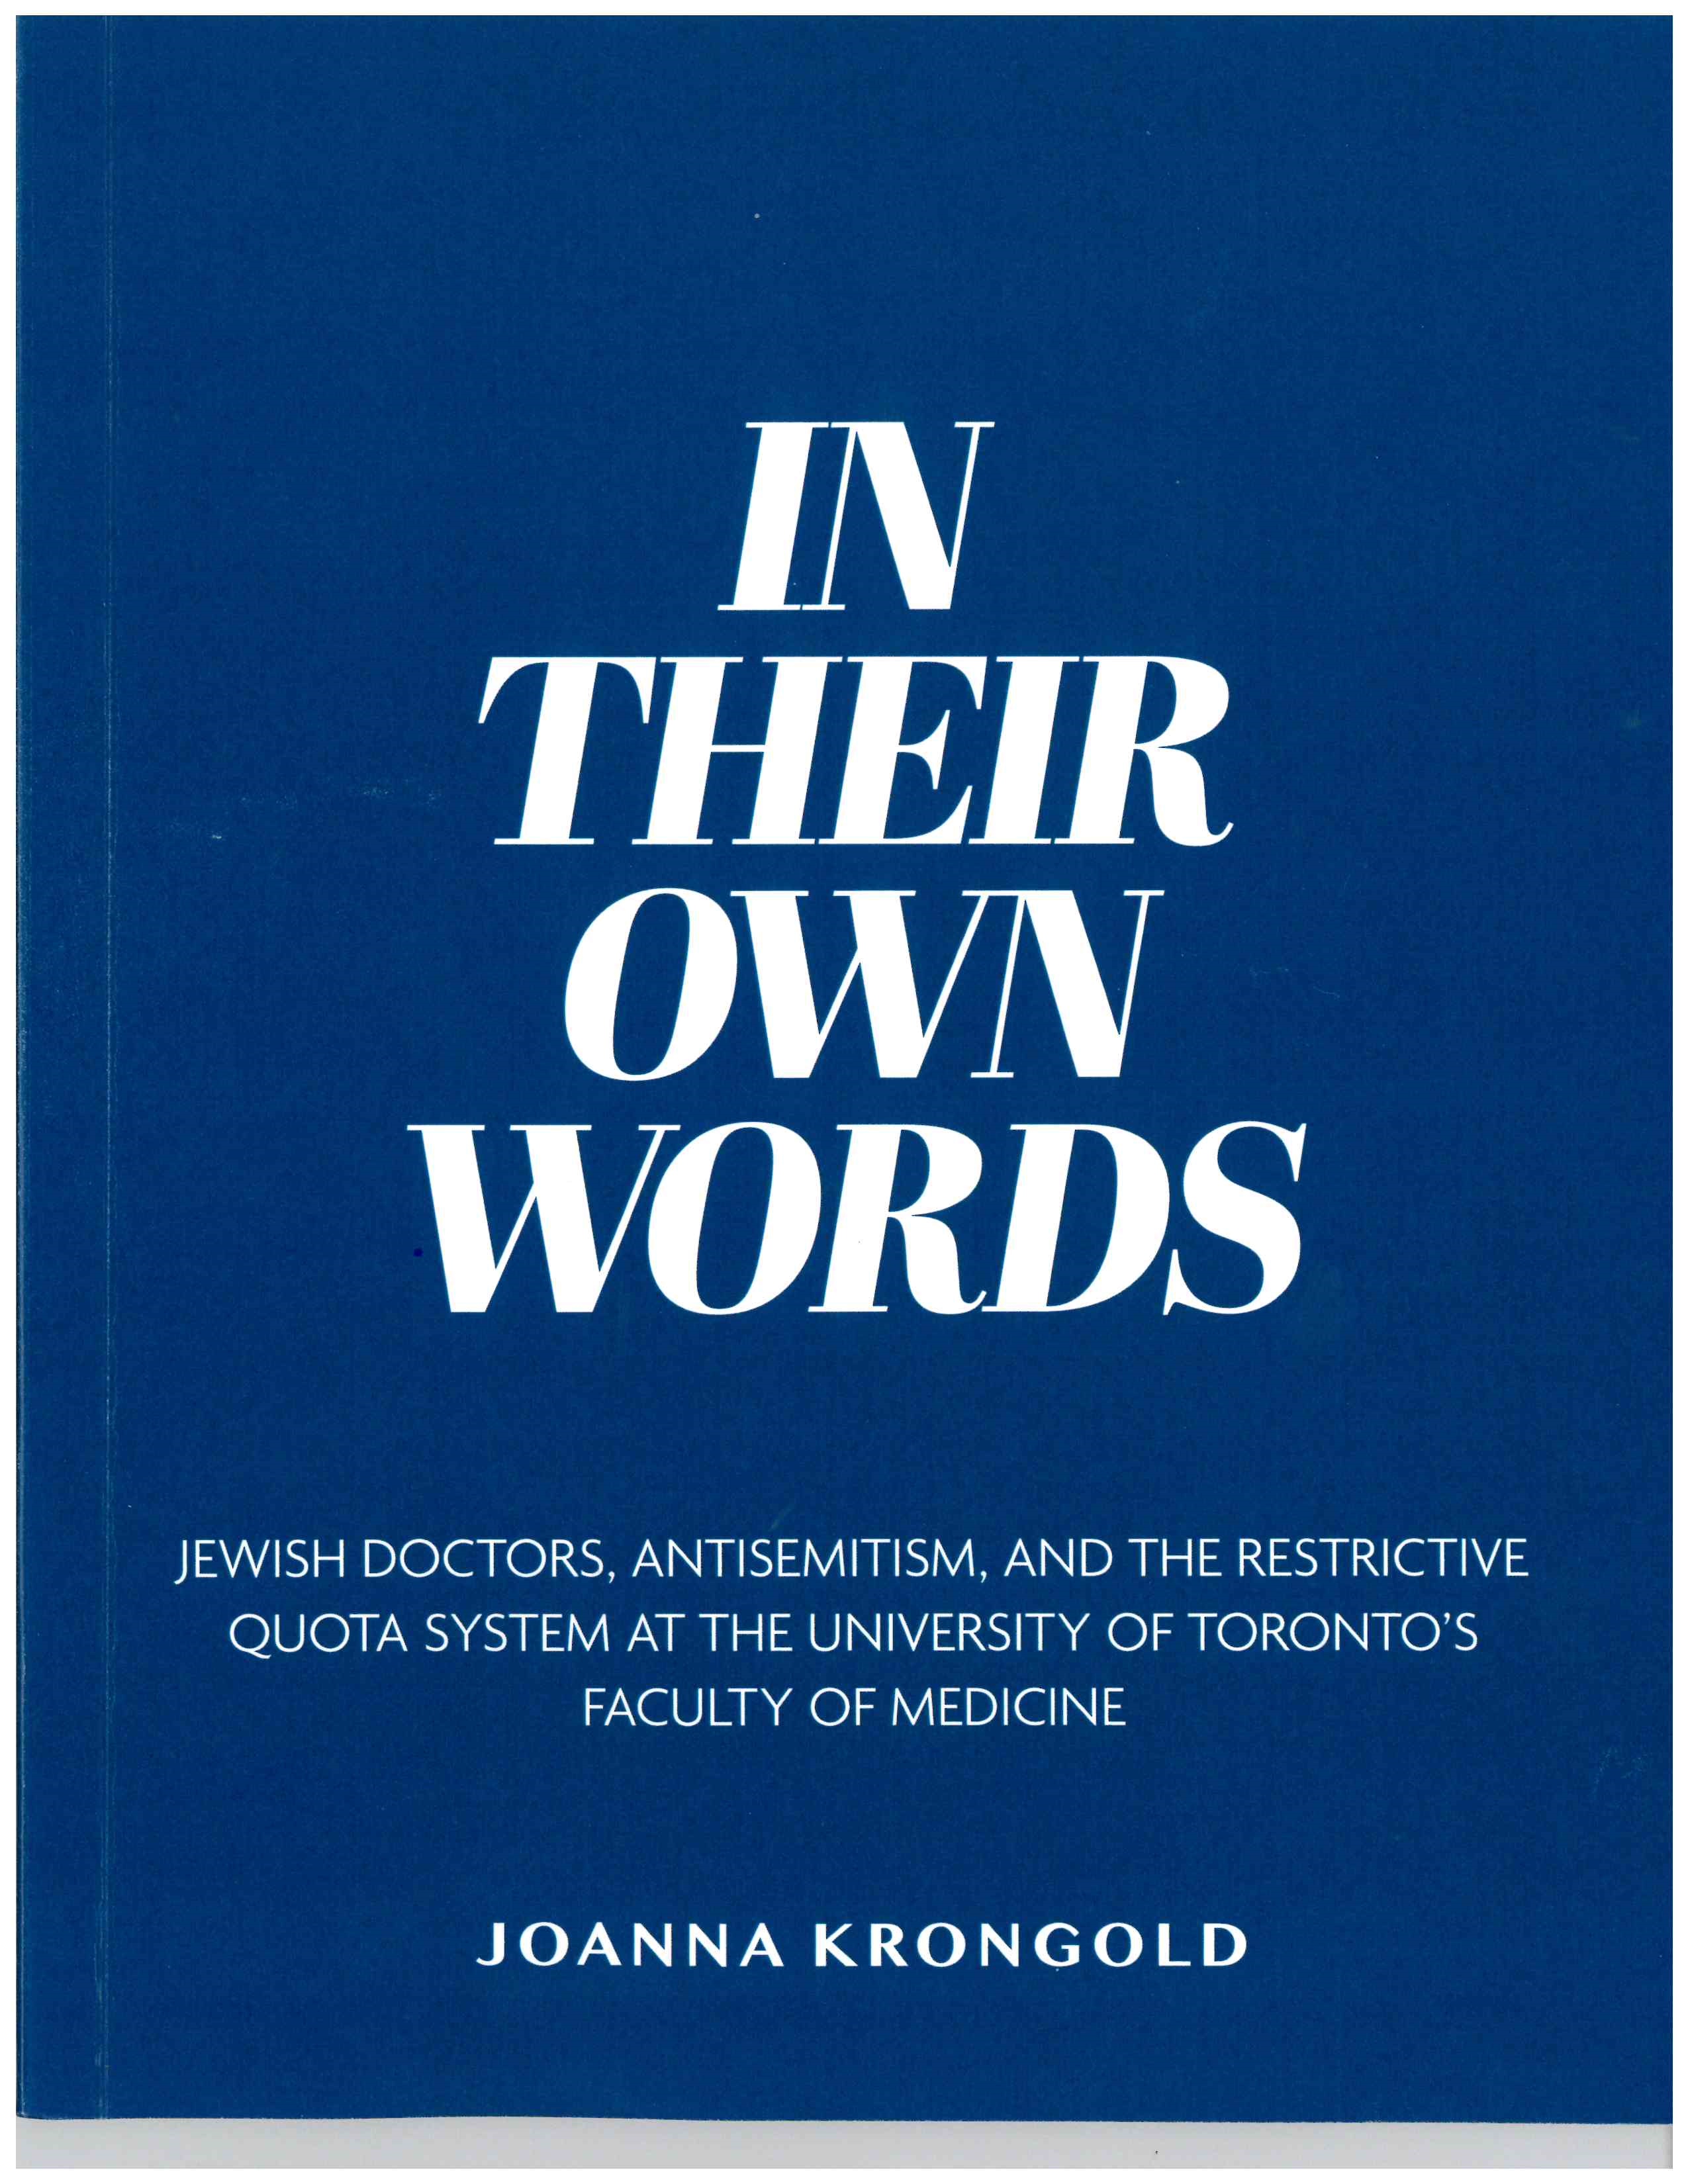 Cover of Dr. Krongold's publication In Their Own Words: Jewish Doctors, Antisemitism, and the Restrictive Quota System at the University of Toronto's Faculty of Medicine